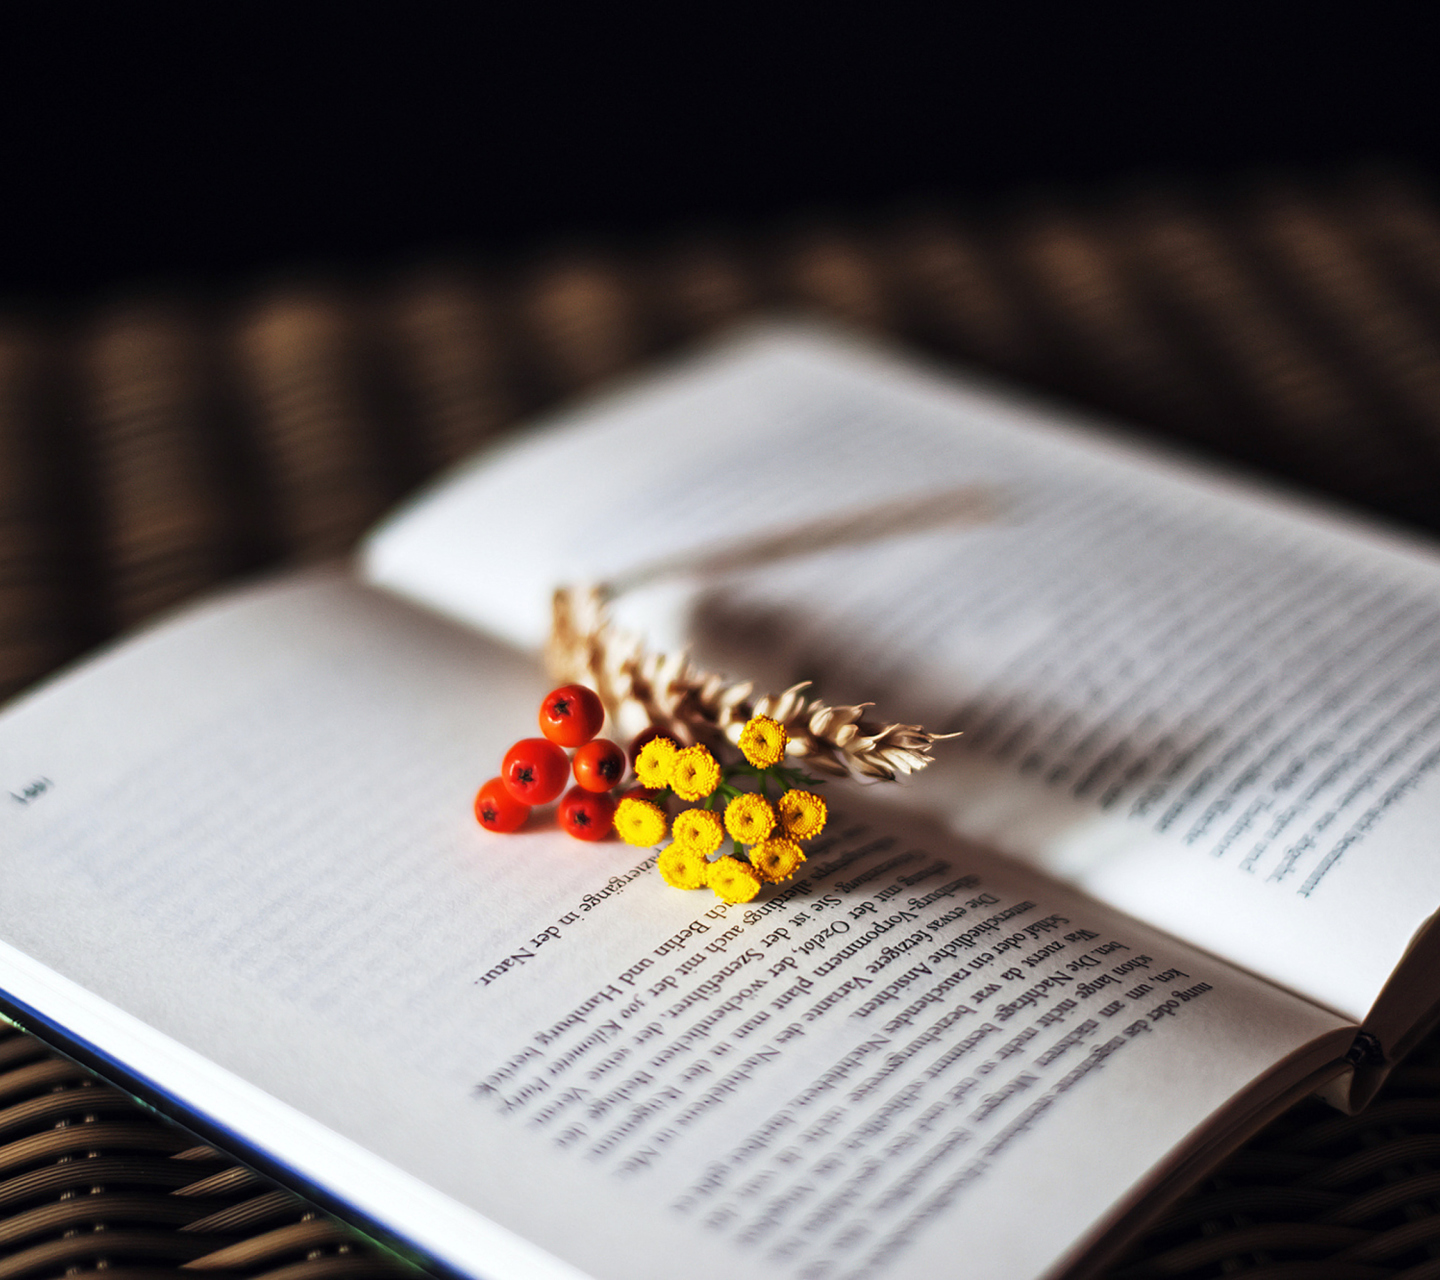 Berries And Flowers On Book screenshot #1 1440x1280